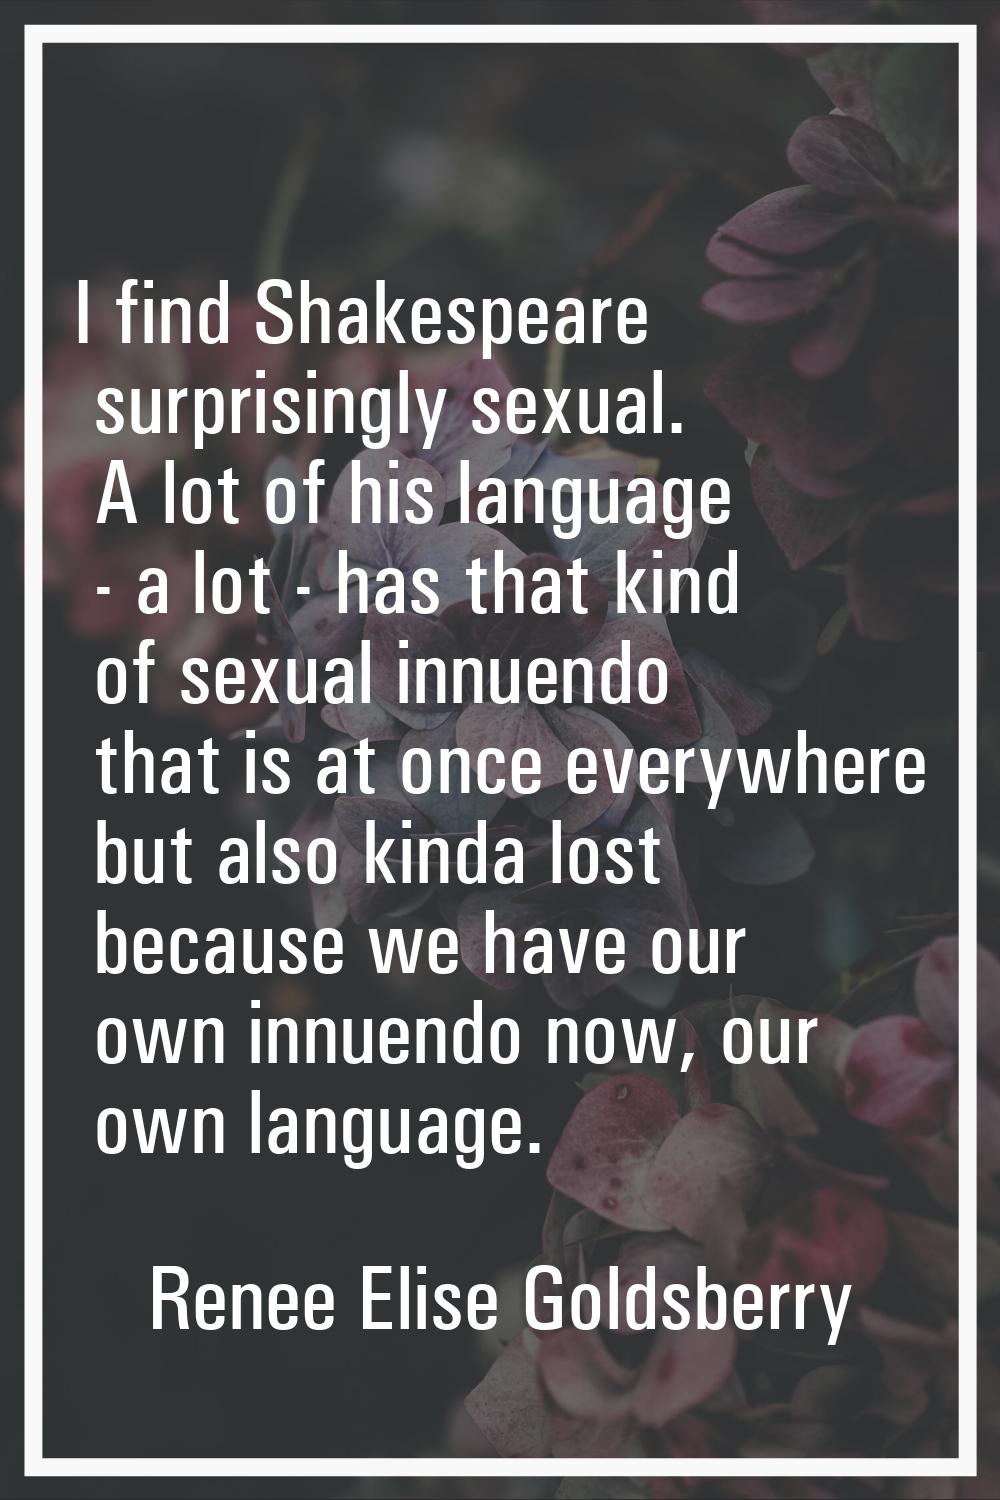 I find Shakespeare surprisingly sexual. A lot of his language - a lot - has that kind of sexual inn